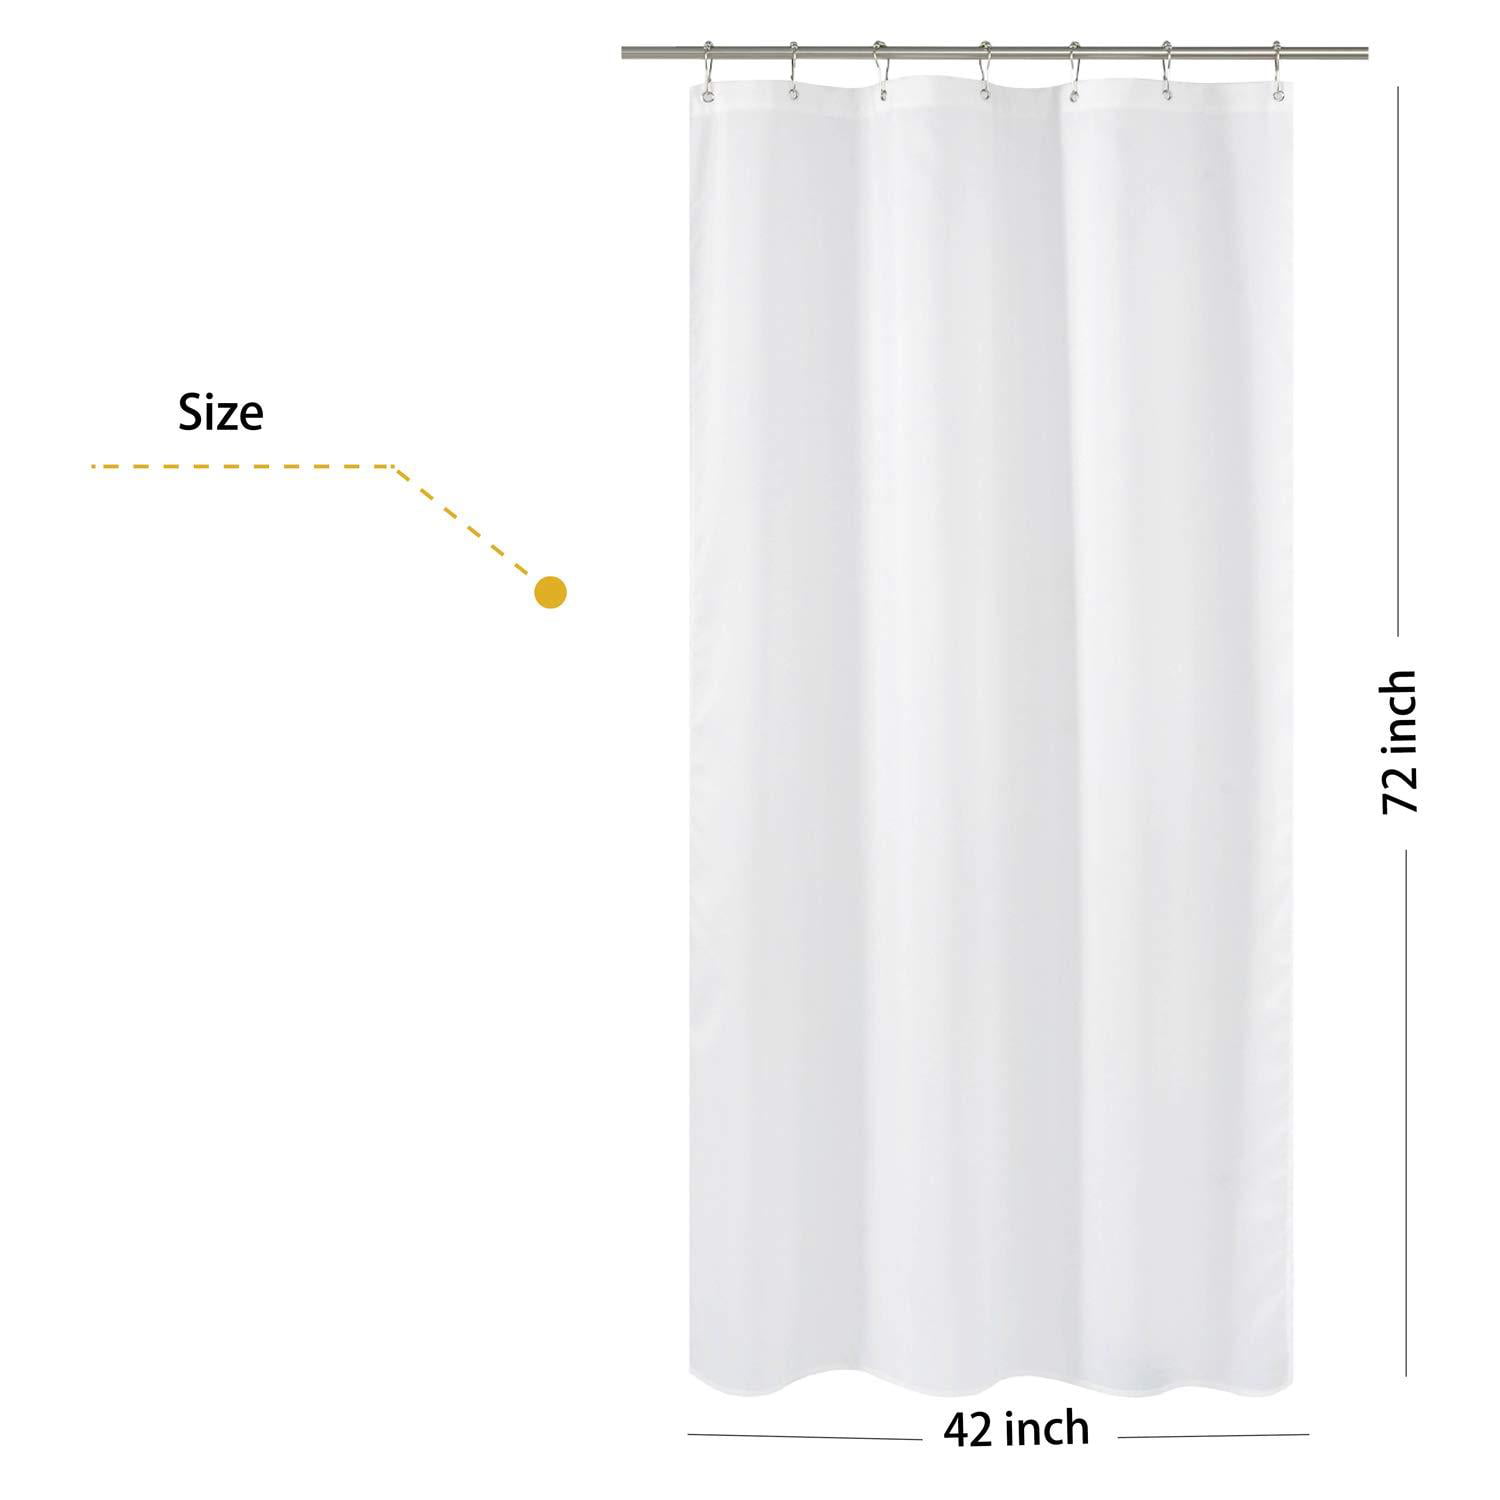 Fabric Shower Curtain Liner Stall Size, What Size Shower Curtain Should I Get